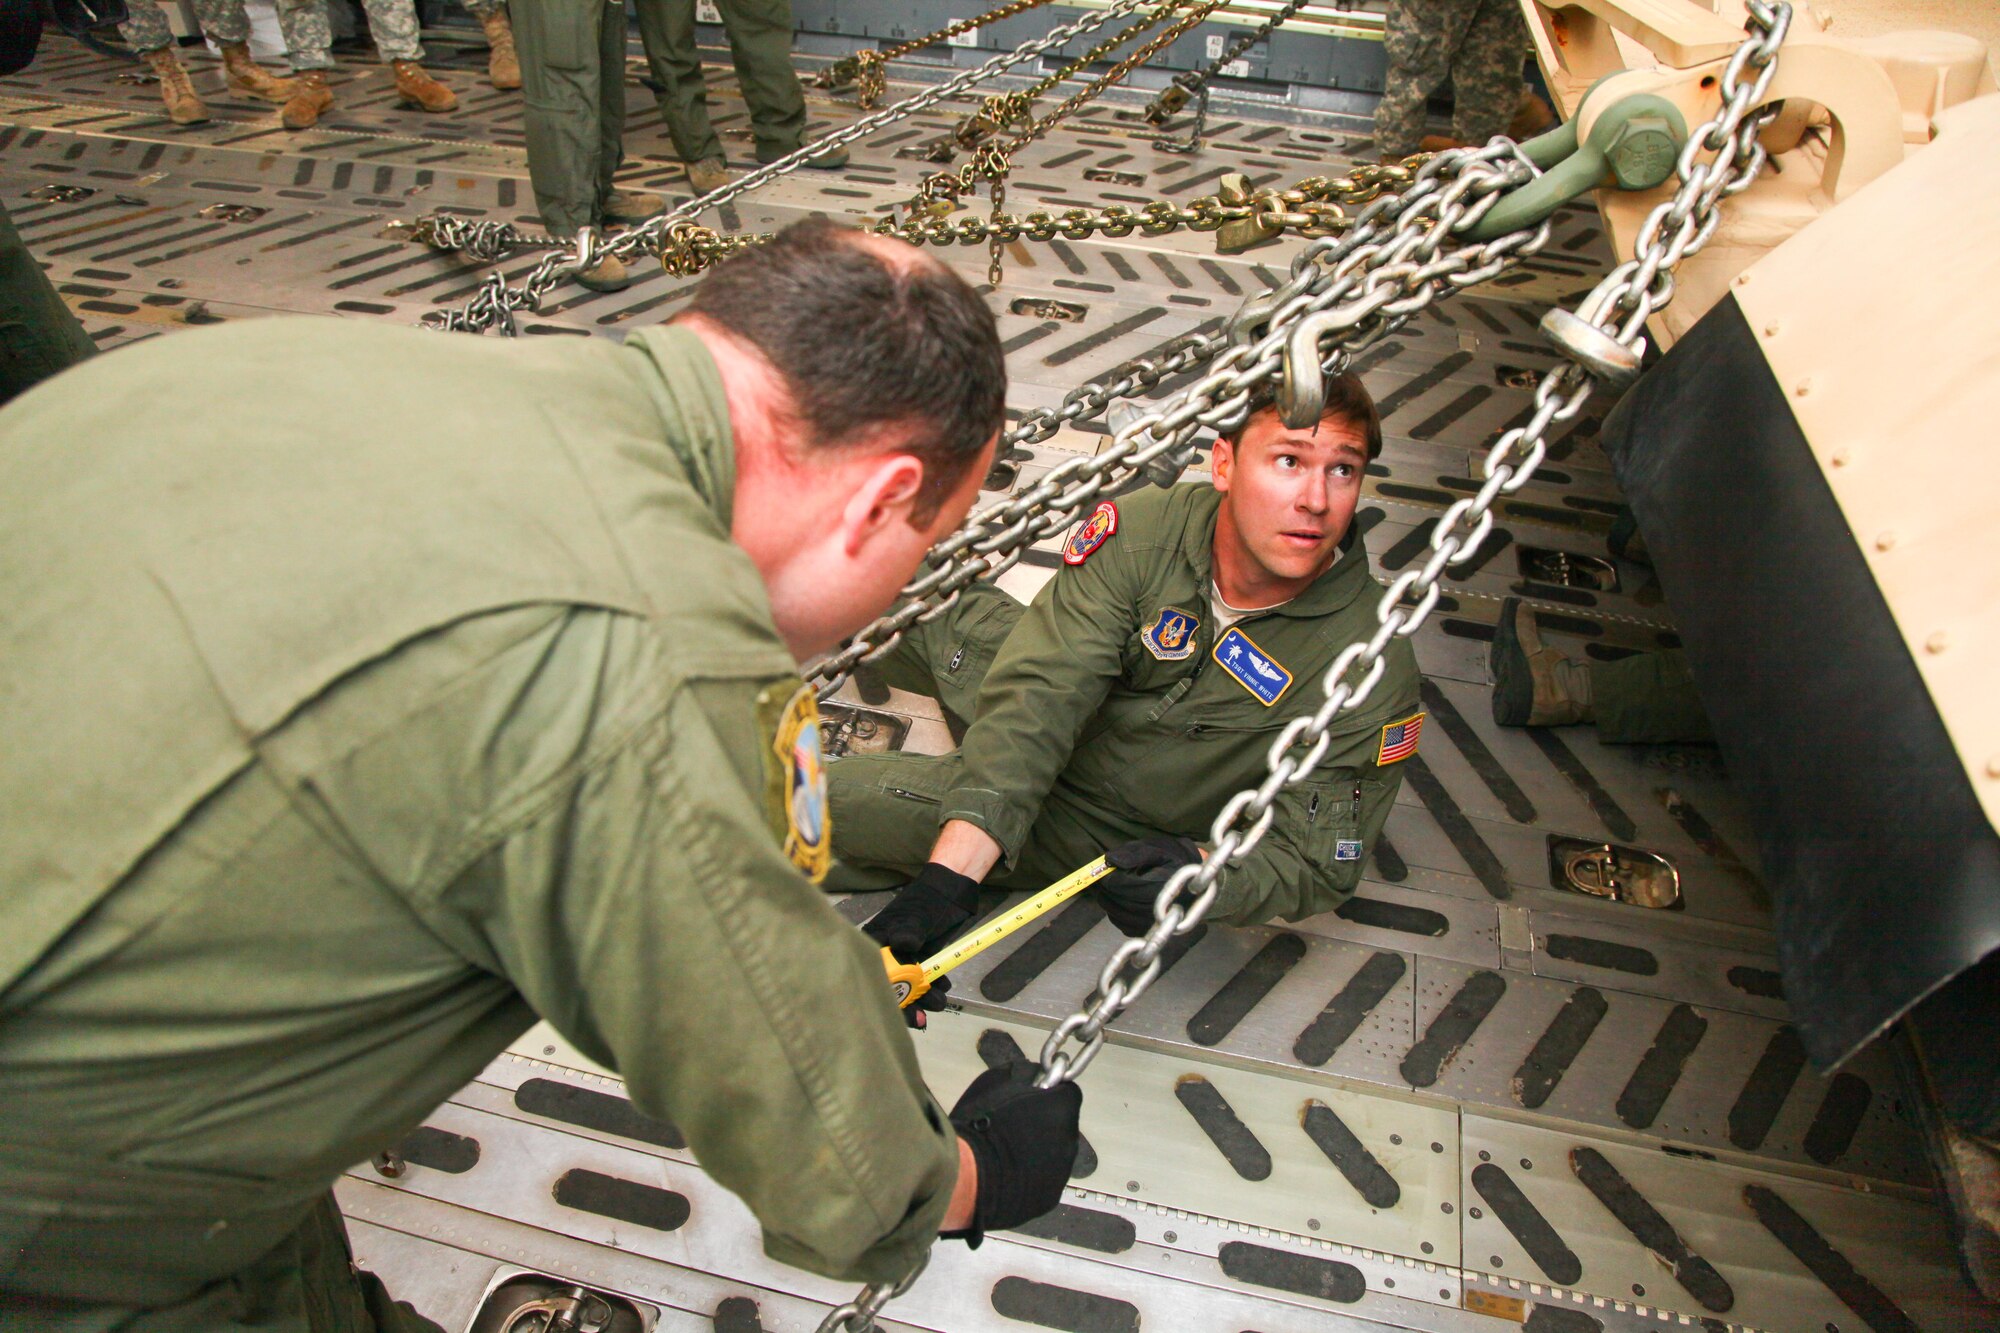 Tech Sgt. Vinnie White, a loadmaster with the 315th Airlift Control Flight, pulls measuring tape to measure the length of tie down chains onboard a C-17 Globemaster III Thursday at Wright Army Airfield, Ga. C-17's from JB Charleston, S.C., and Wright-Patterson Air Force Base, Ohio, transported four tanks from Wright AAF to McEntire Air National Guard Base, S.C., in support of a tank movement for the 1/118th CAB. (U.S. Air Force photo by Staff Sgt. Rashard Coaxum/released)
